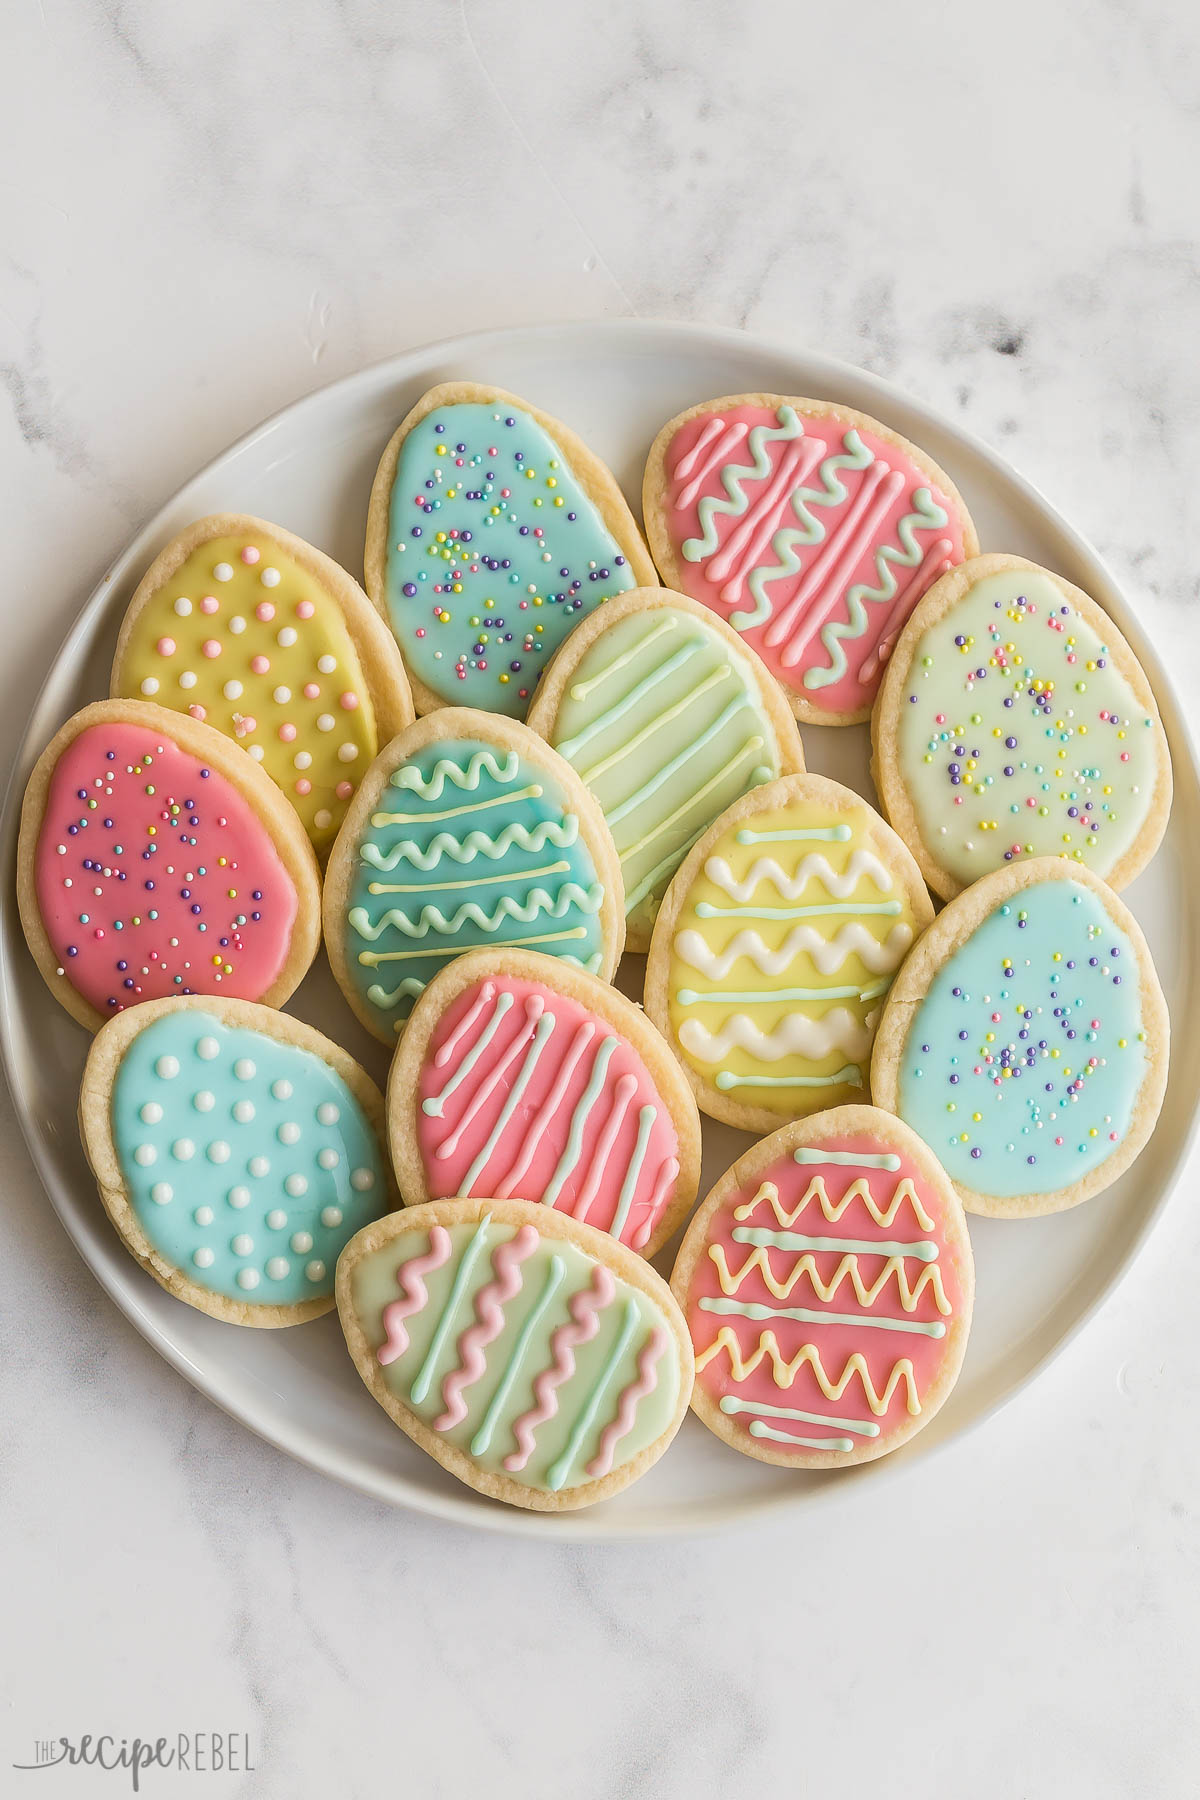 overhead image of plate of easter egg cookies in pastel colors